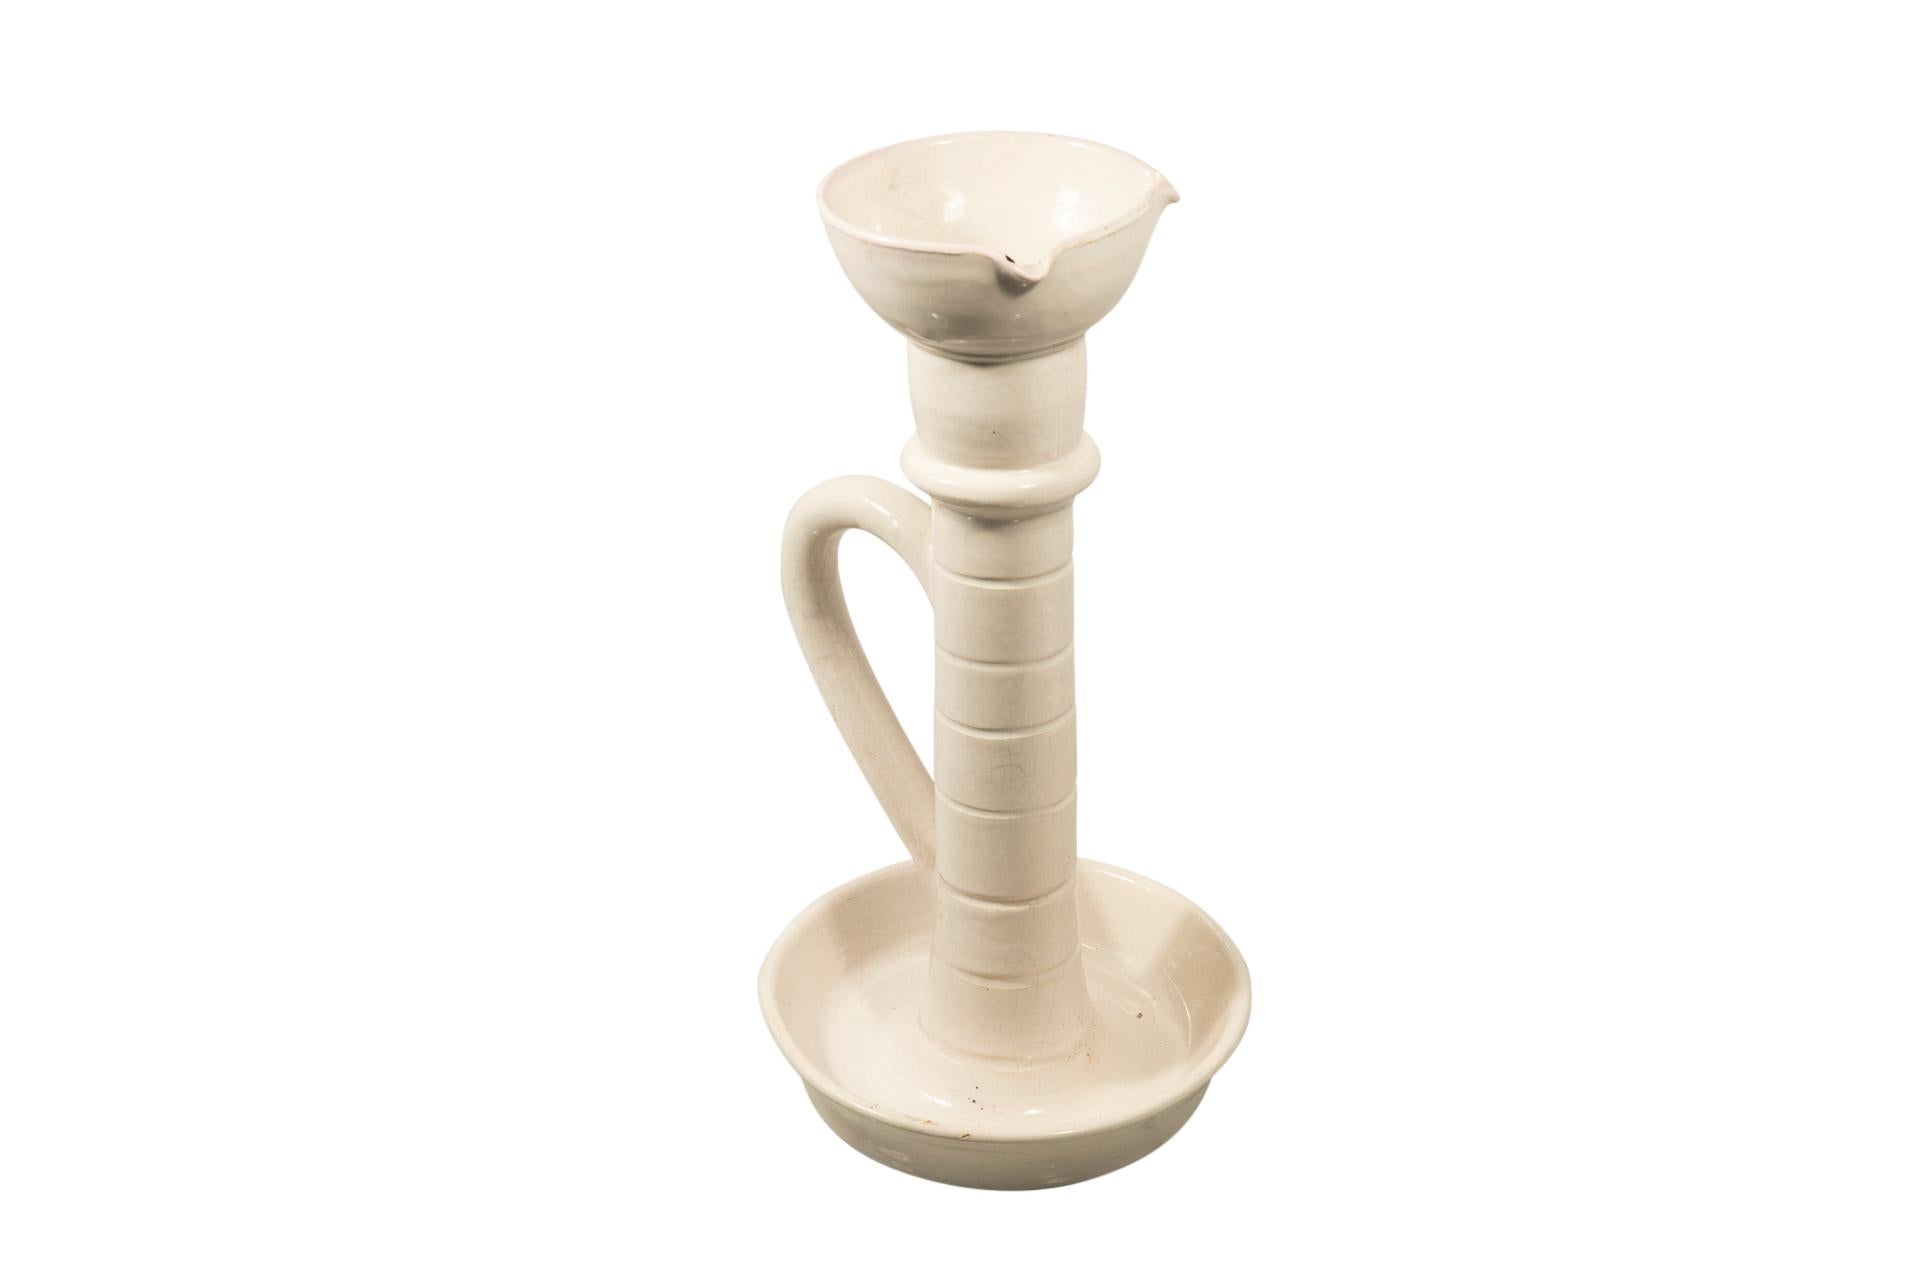 Suzanne Ramié (1905-1974), 
Madoura workshop, 
White ceramic candlestick, 
France, circa 1945.

Measures: Height 37 cm, diameter 21 cm.

Suzanne Douly, born in Lyon 3e on January 13, 1905, died on June 12, 1974, is a French ceramist, known as an